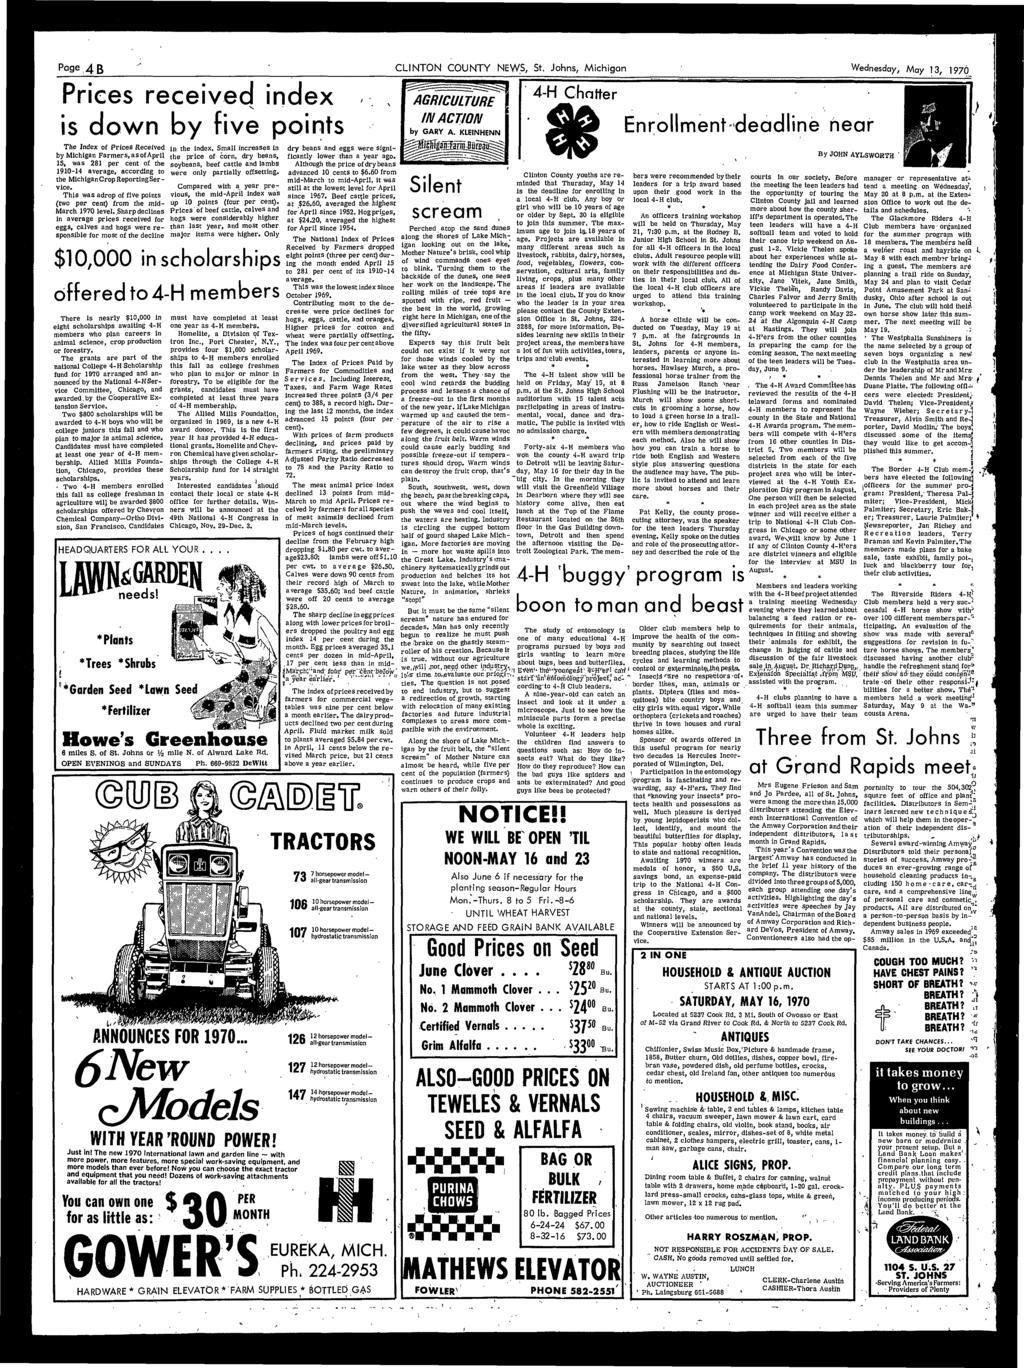 Page, 4 B CLINTON COUNTY NEWS, St, Johns, Michigan Wednesday, May, 1970 Prices received index is down by five points The Index of Prices Received by Michigan Farmers, as of April IS, was 281 per cent